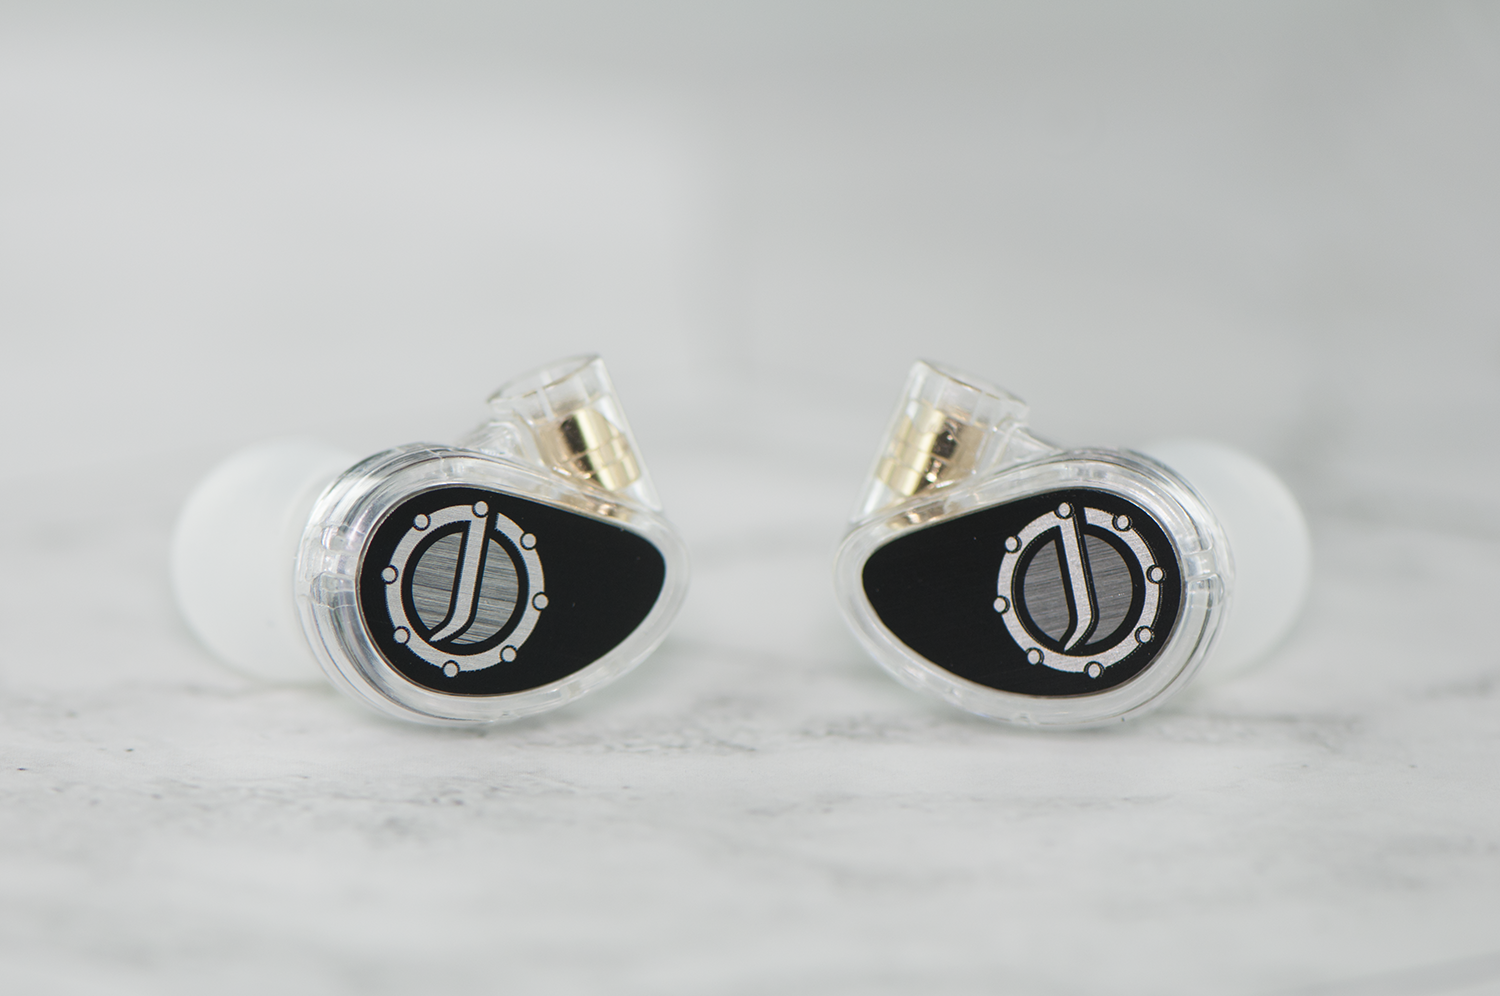 Two high-end in-ear monitors with transparent housings and black faceplates featuring a unique silver and white design, positioned on a marble surface.